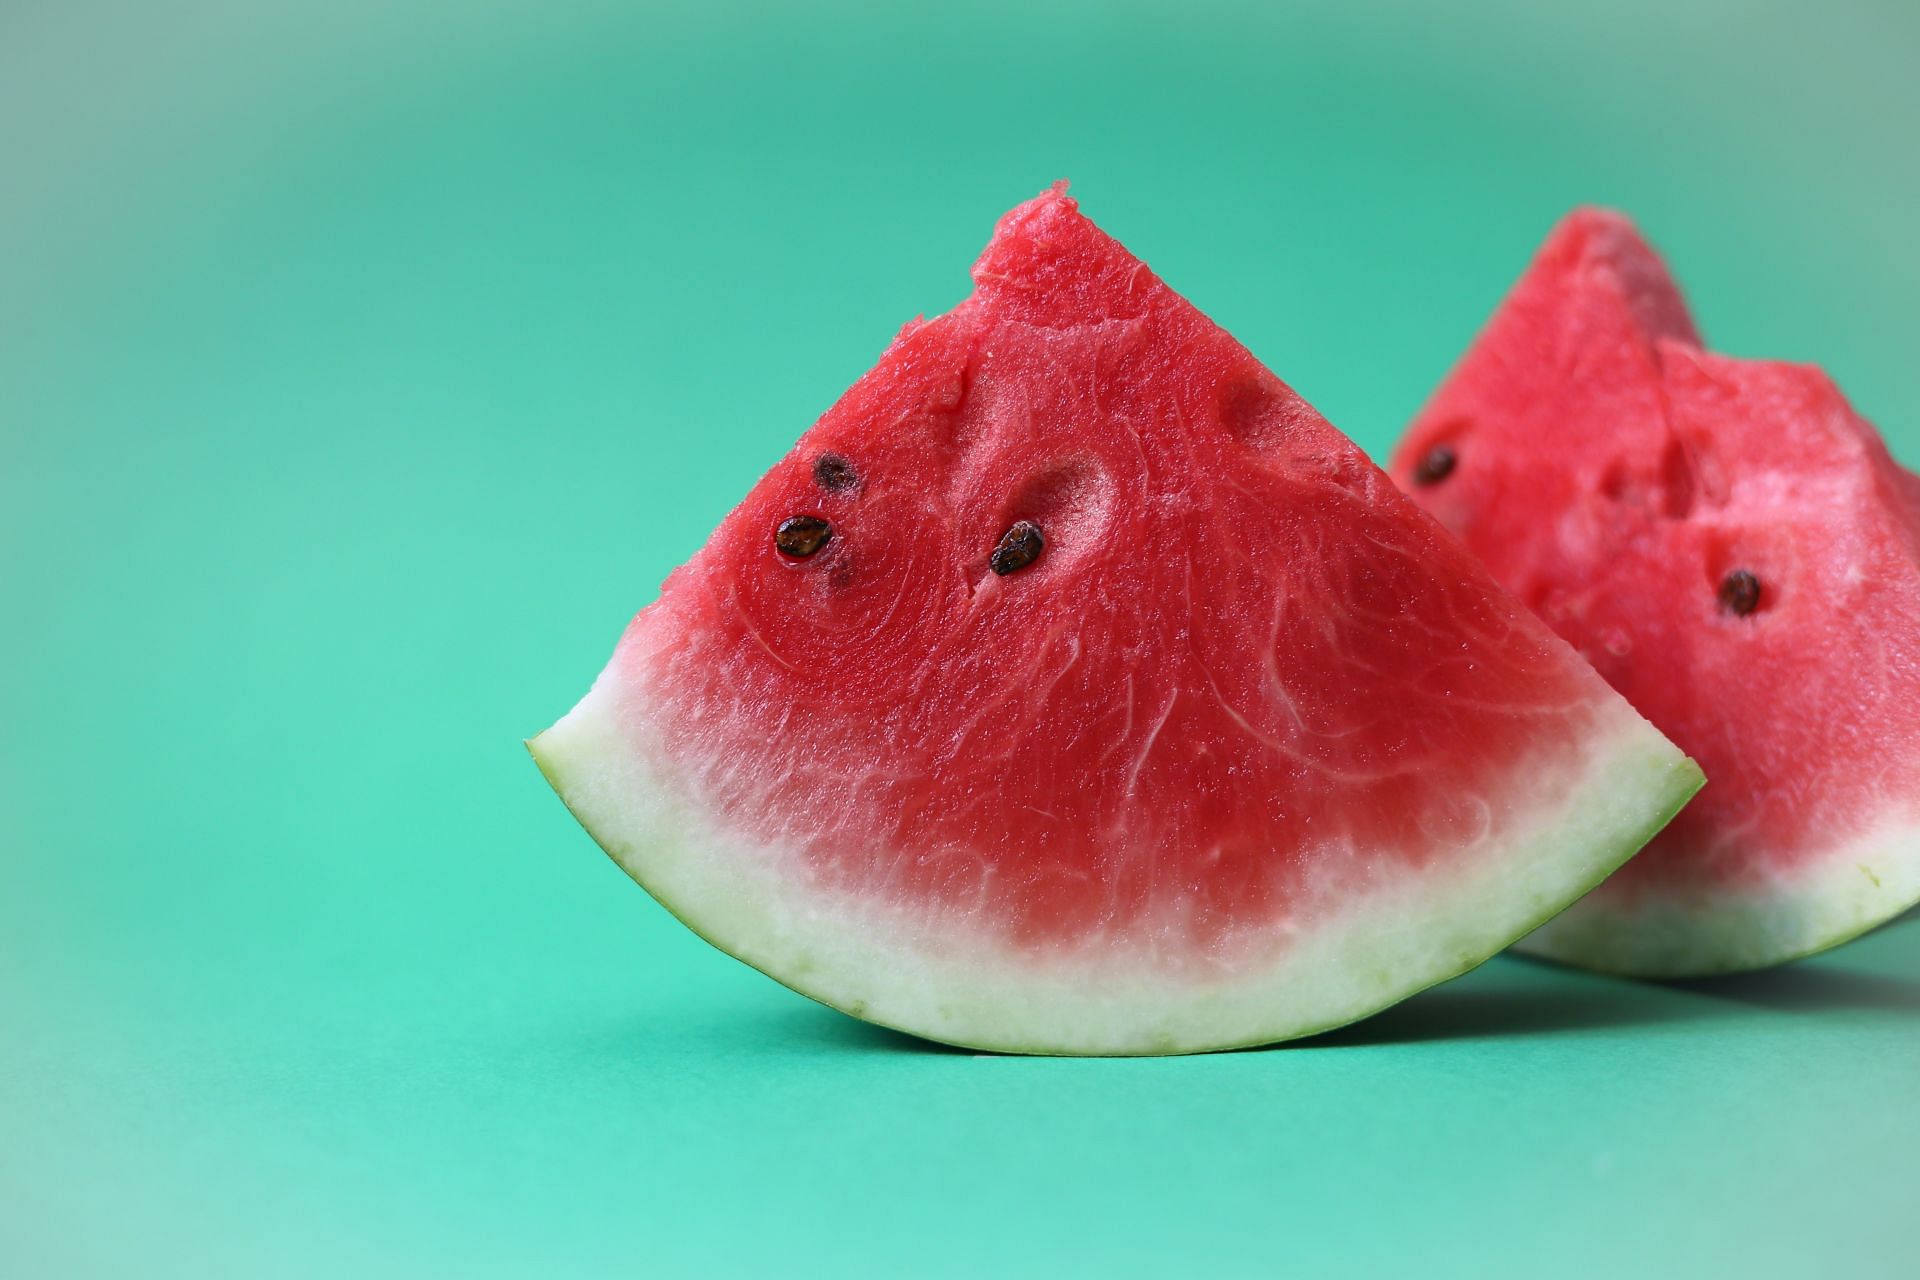 Watermelon is one of the best summer fruits. (Image via Unsplash/Sahand Babali)